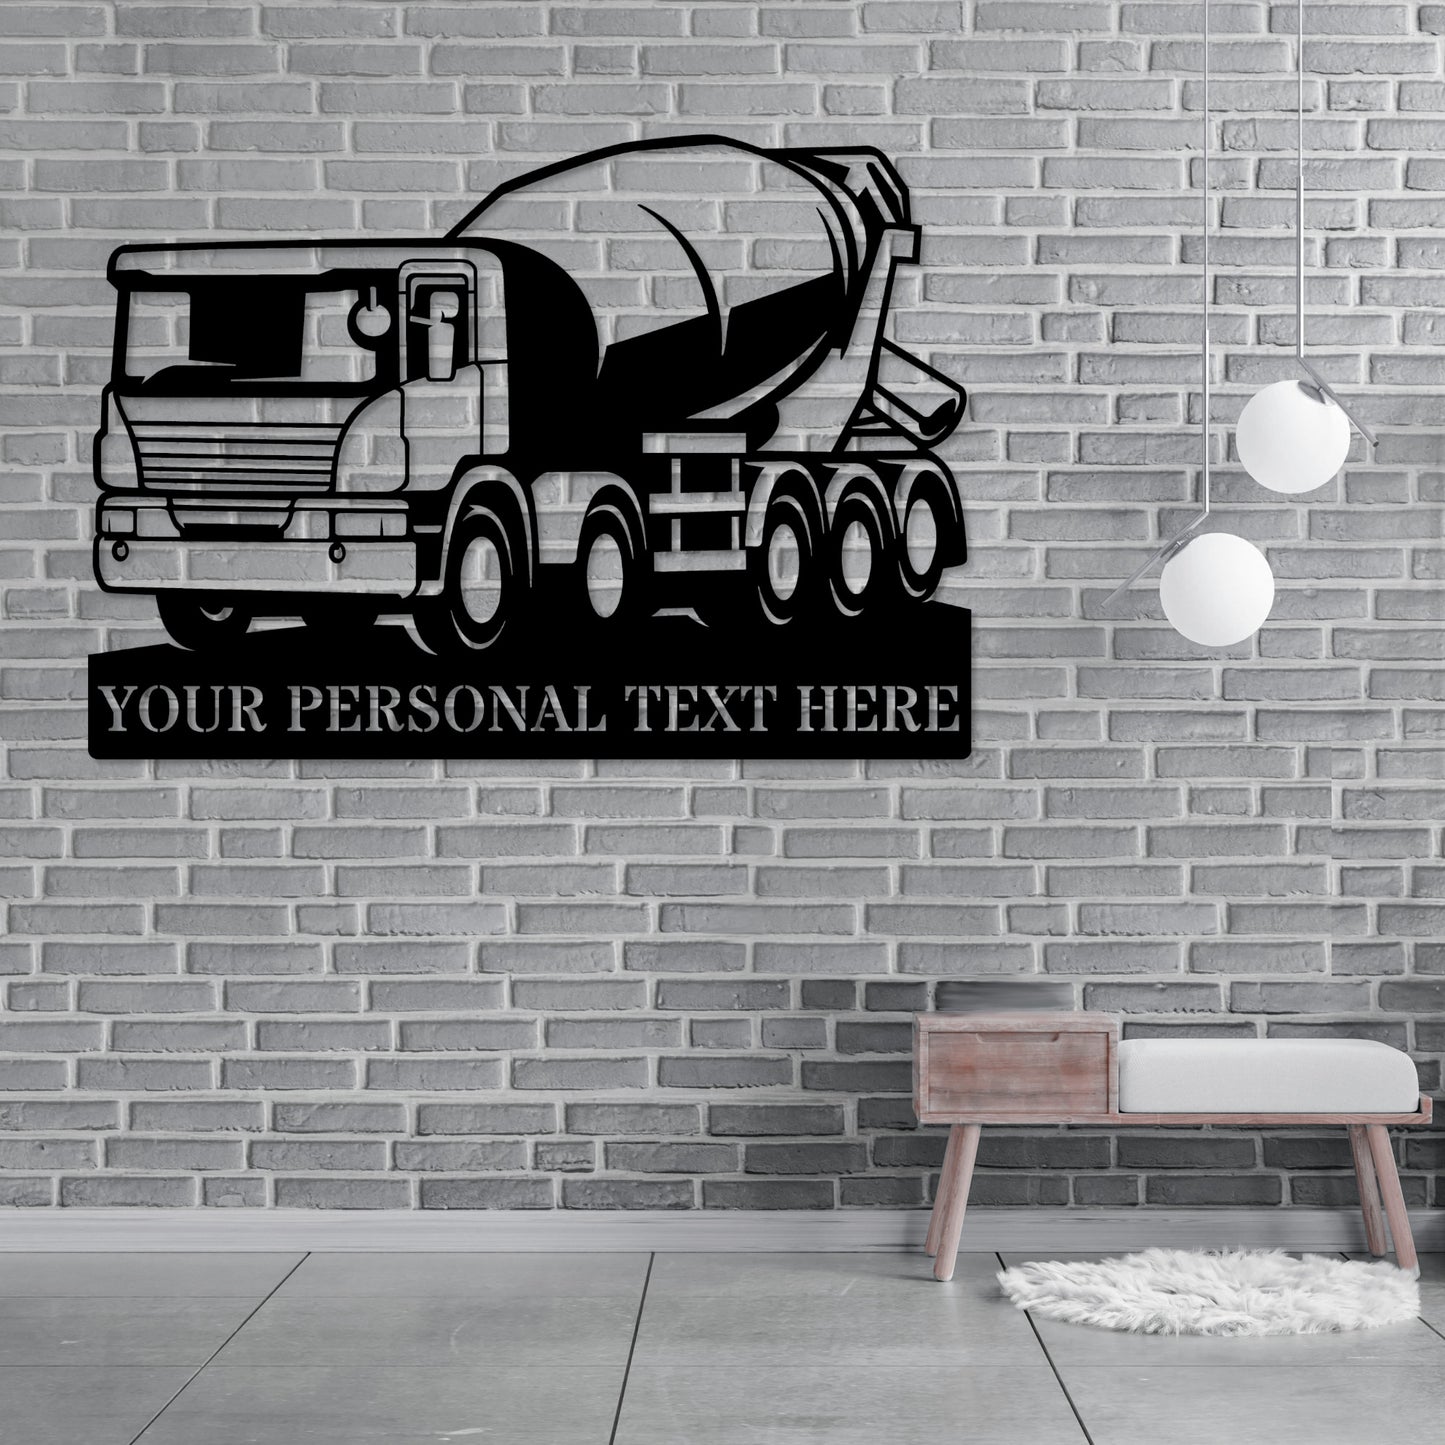 Personalized Concrete Truck Metal Sign. Custom Concrete Mixer Wall Decor Gift. Construction Worker Gift. Truck Driver Present. Trucker Sign